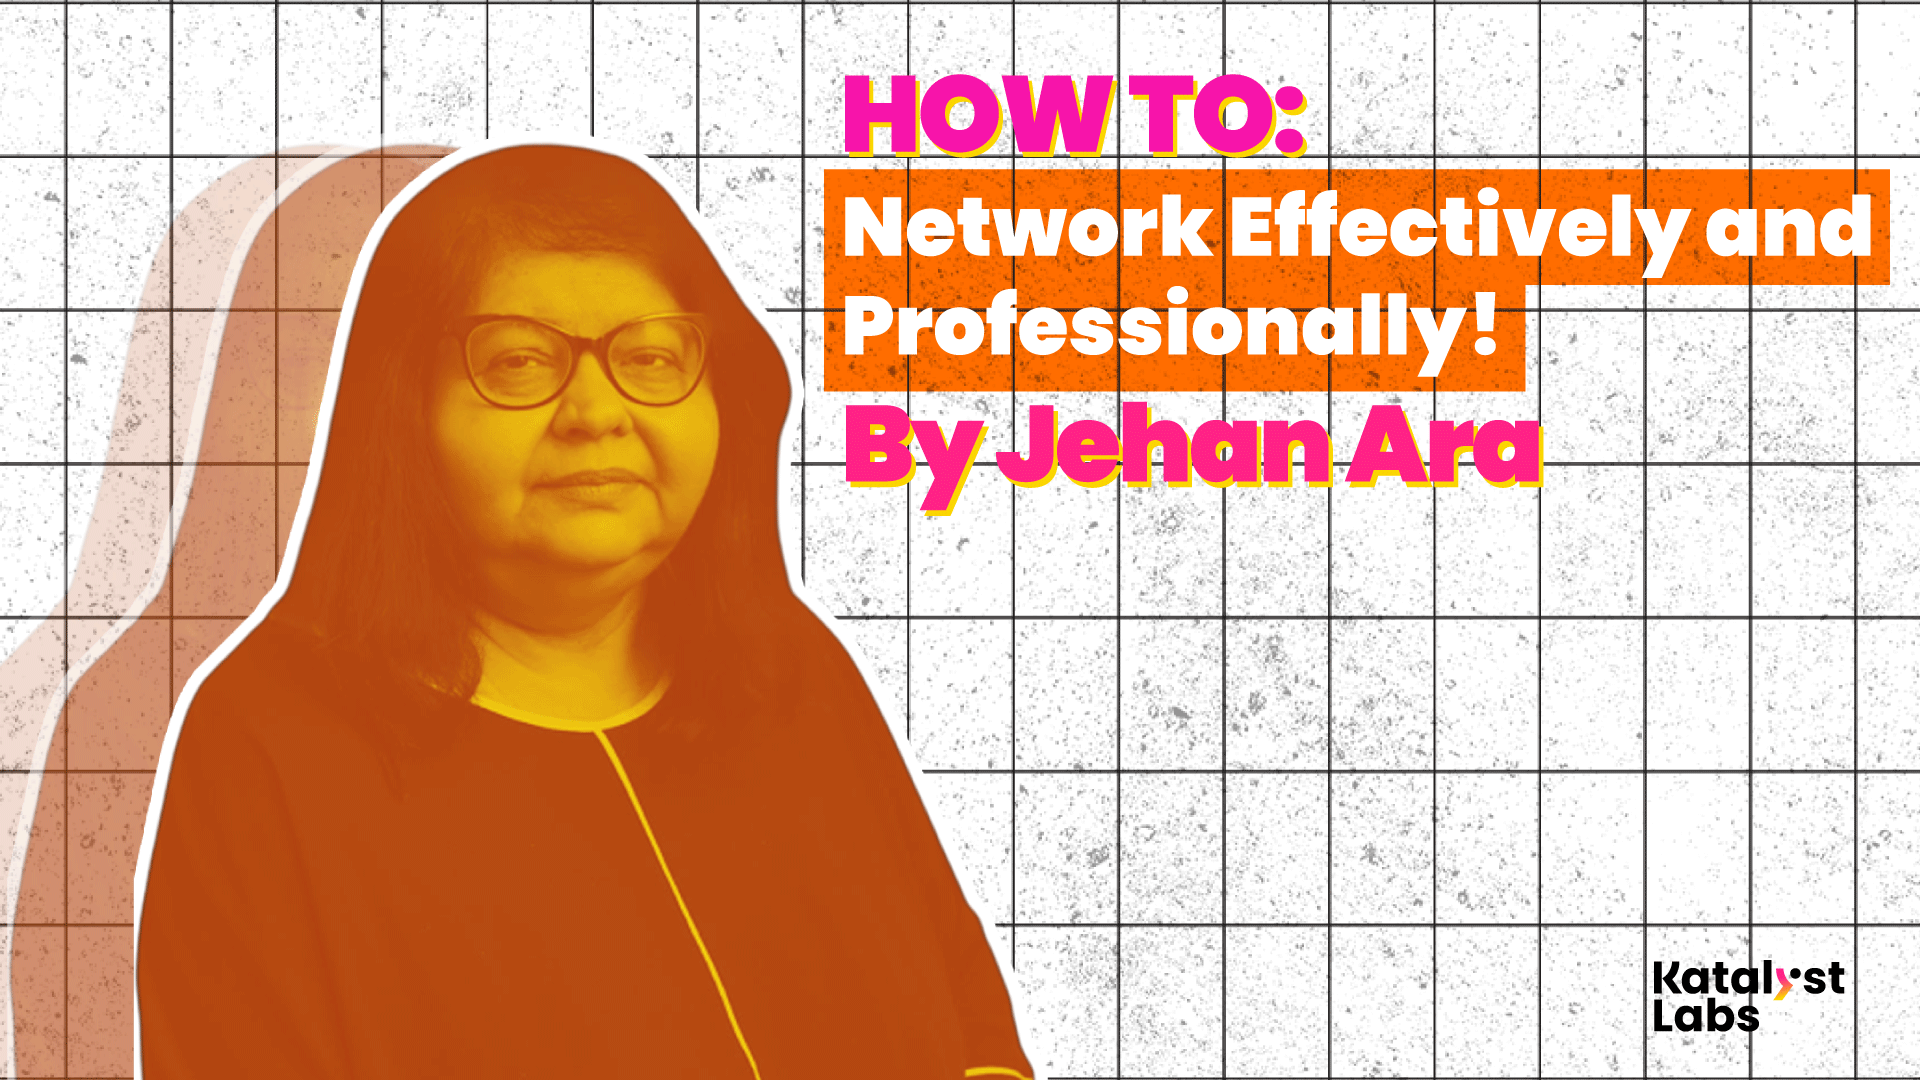 How to Network Effectively!